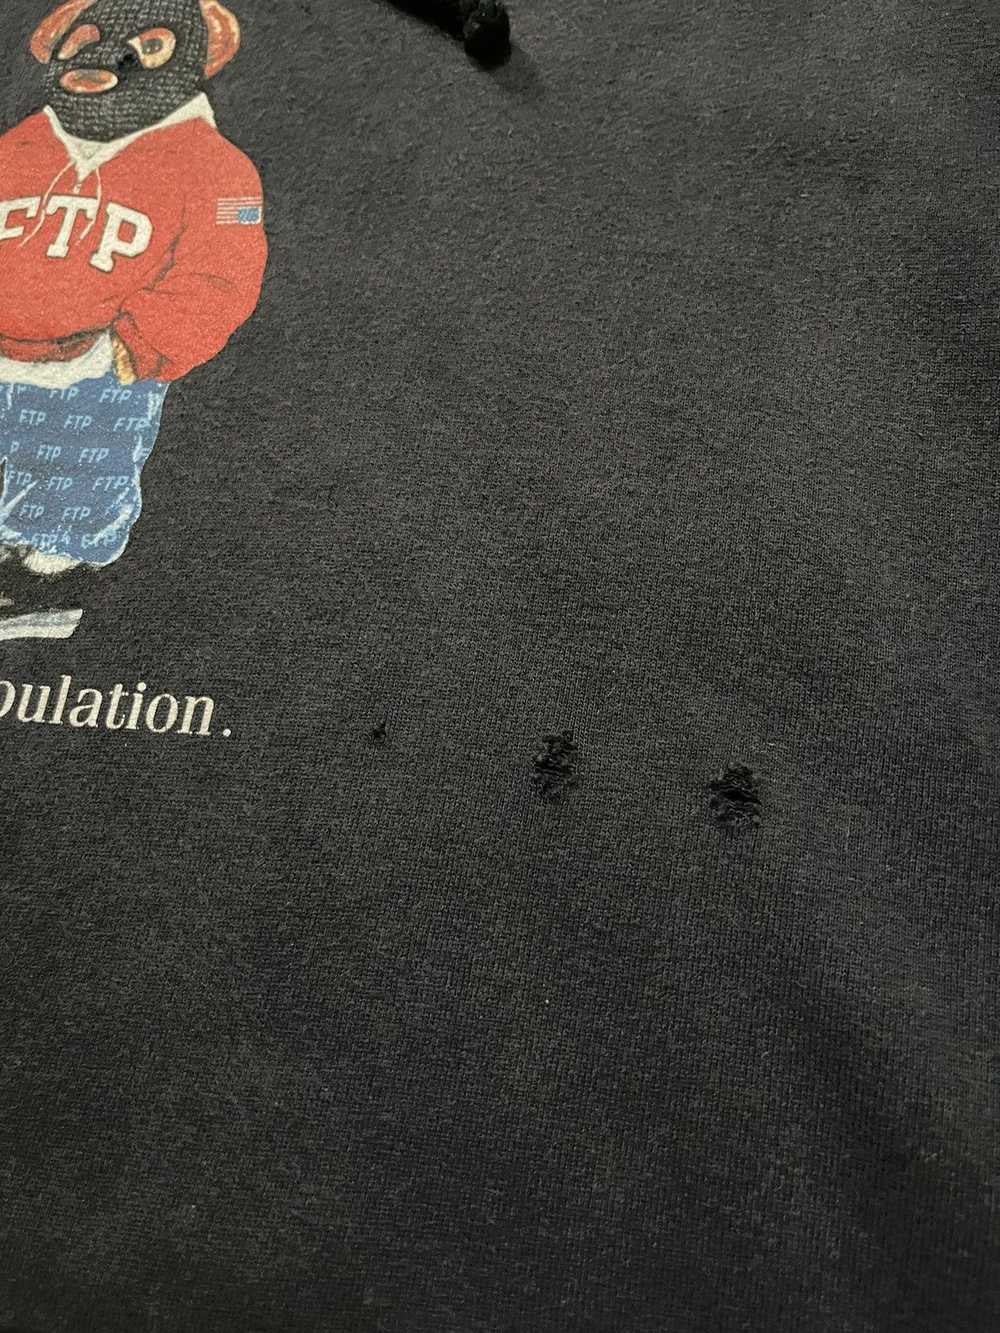 Fuck The Population FTP Bear Hoodie Navy Large - image 4